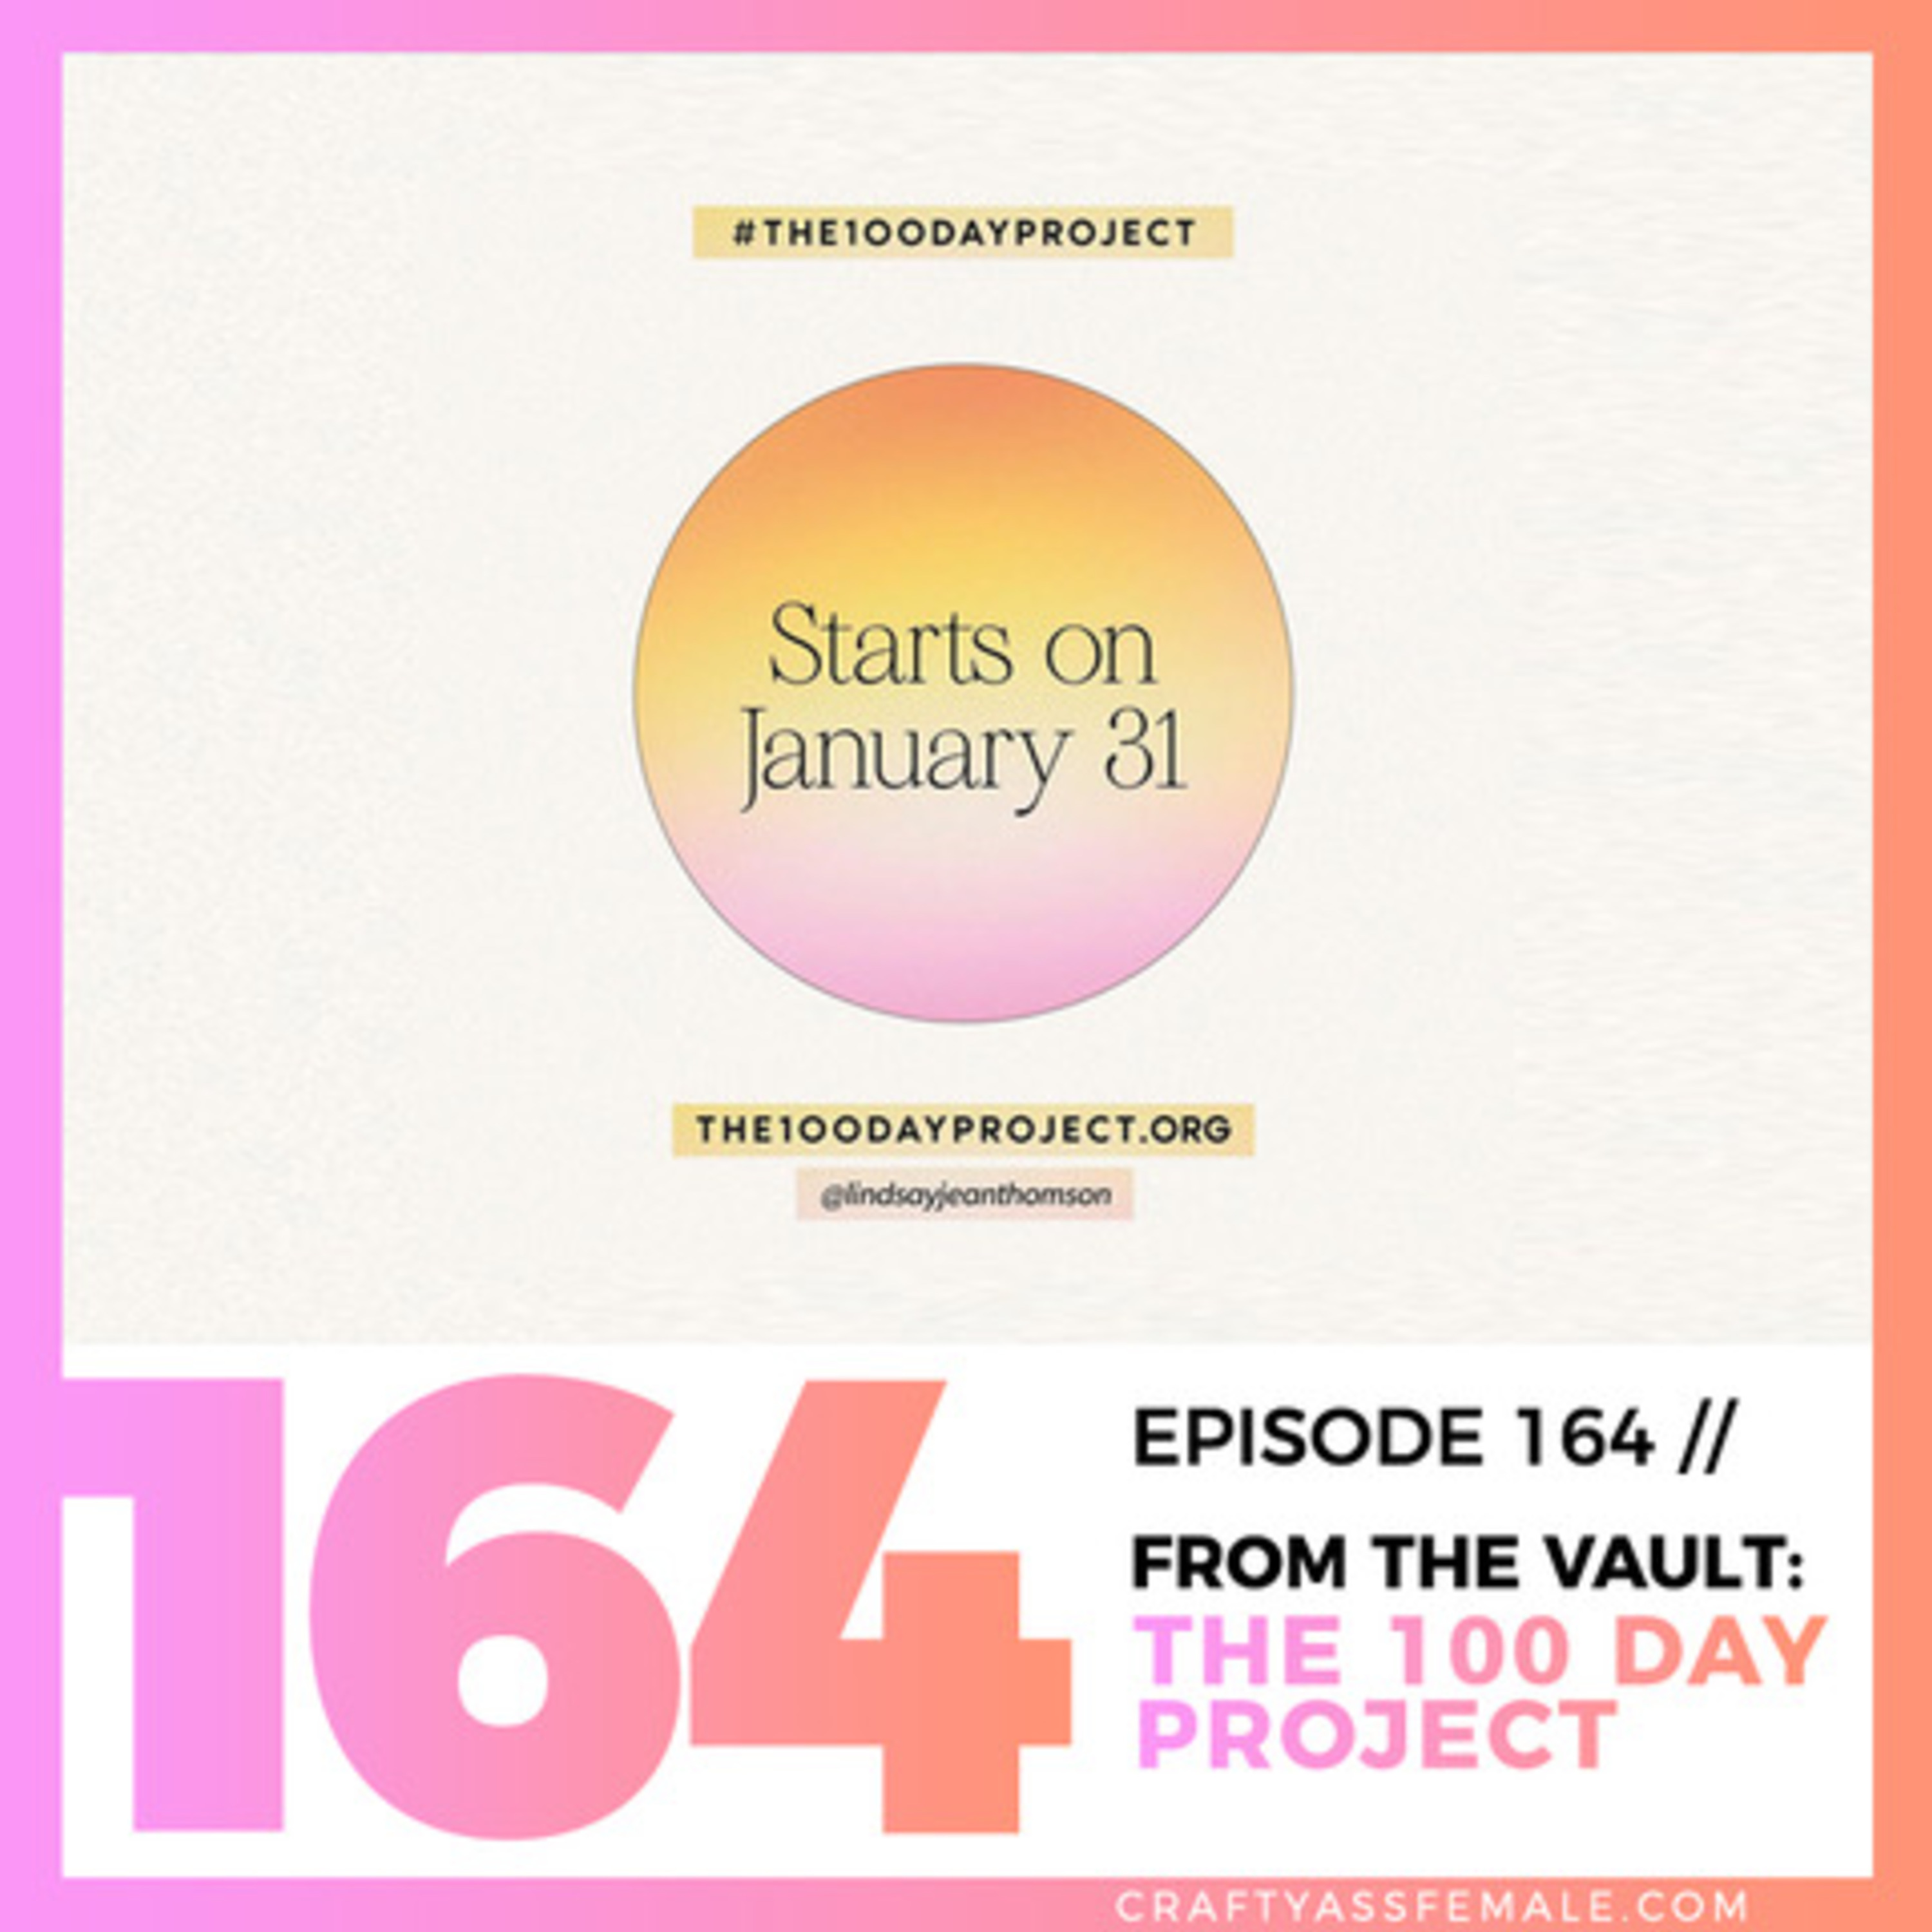 Episode 164: From the Vault: The 100 Day Project